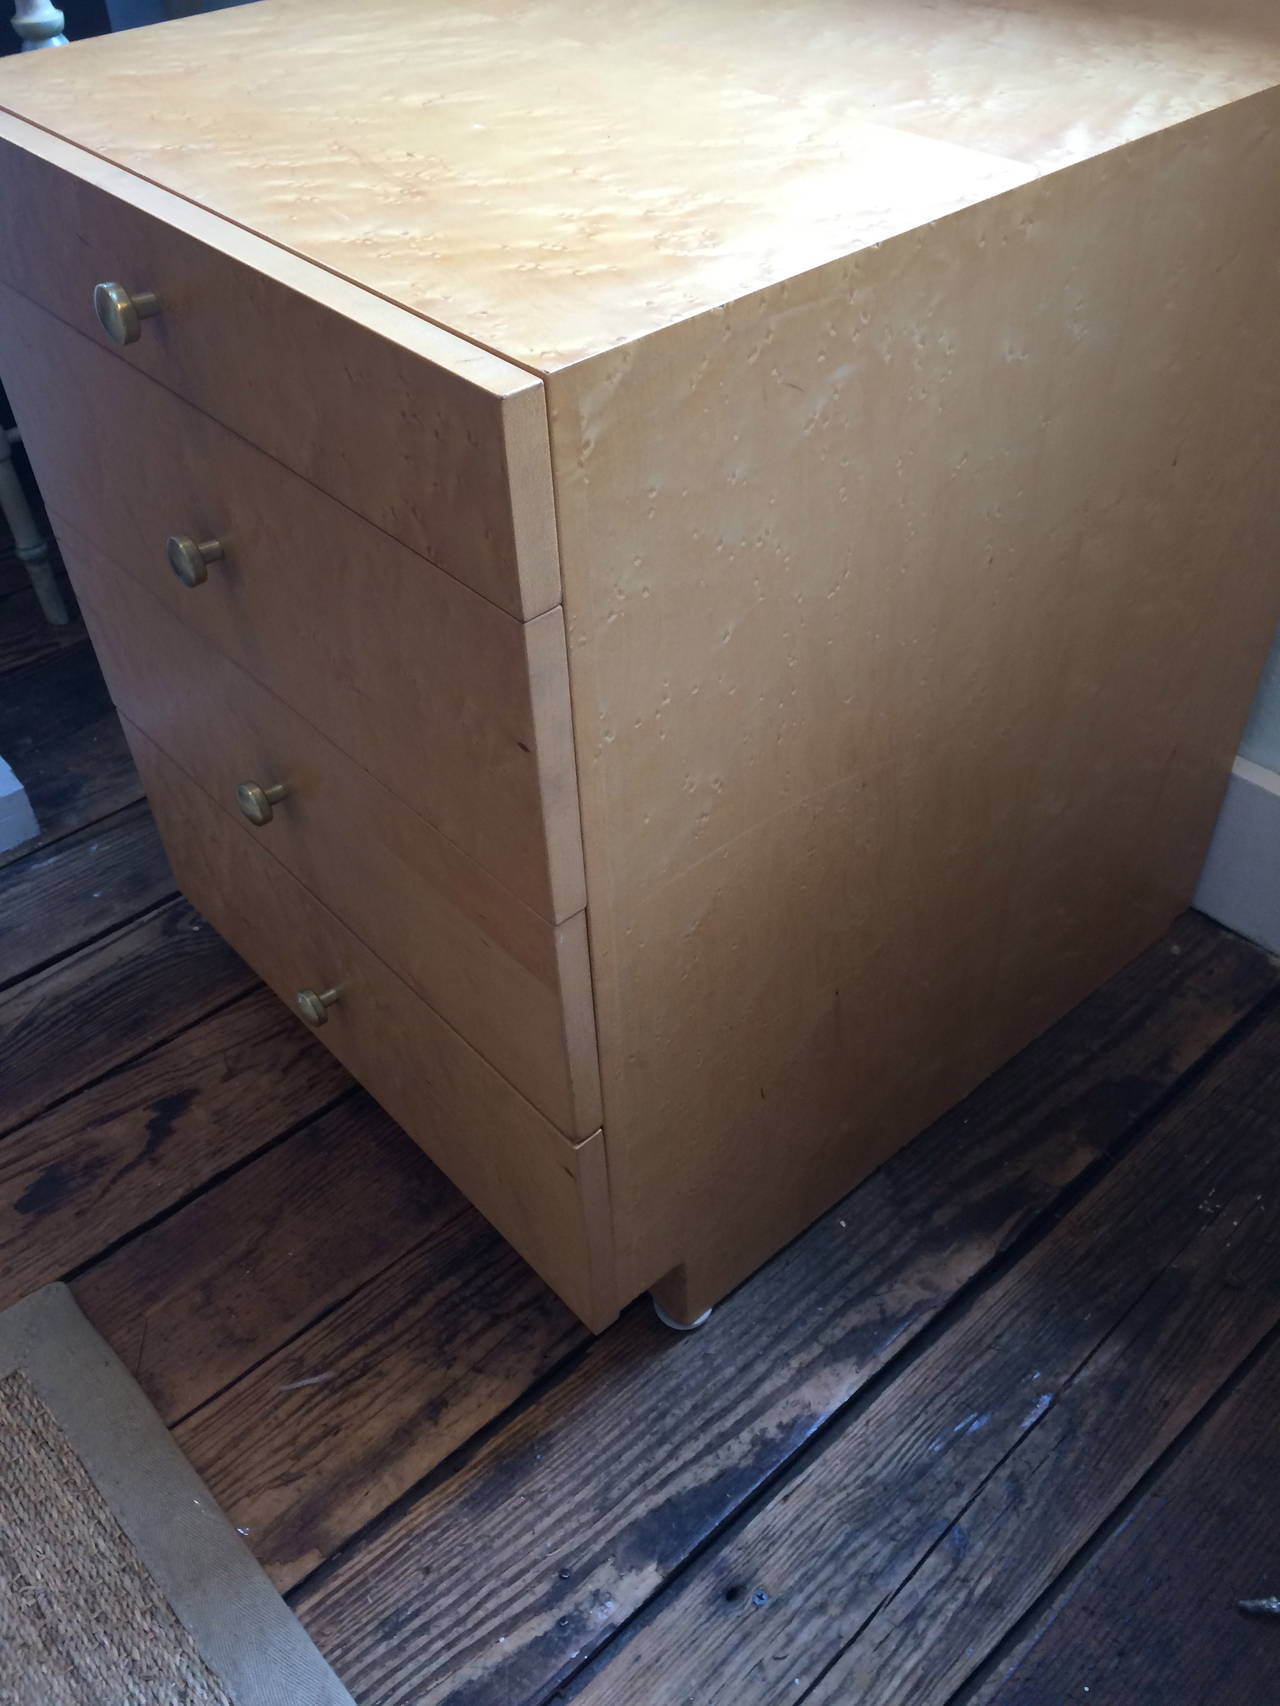 Mid-century modern chests with three drawers in each and a pull-out extension surface on top. Blonde tiger maple. Would make great nightstands with three drawers for extra storage and space for lamps on top. Probably by Van Leigh, but no markings.